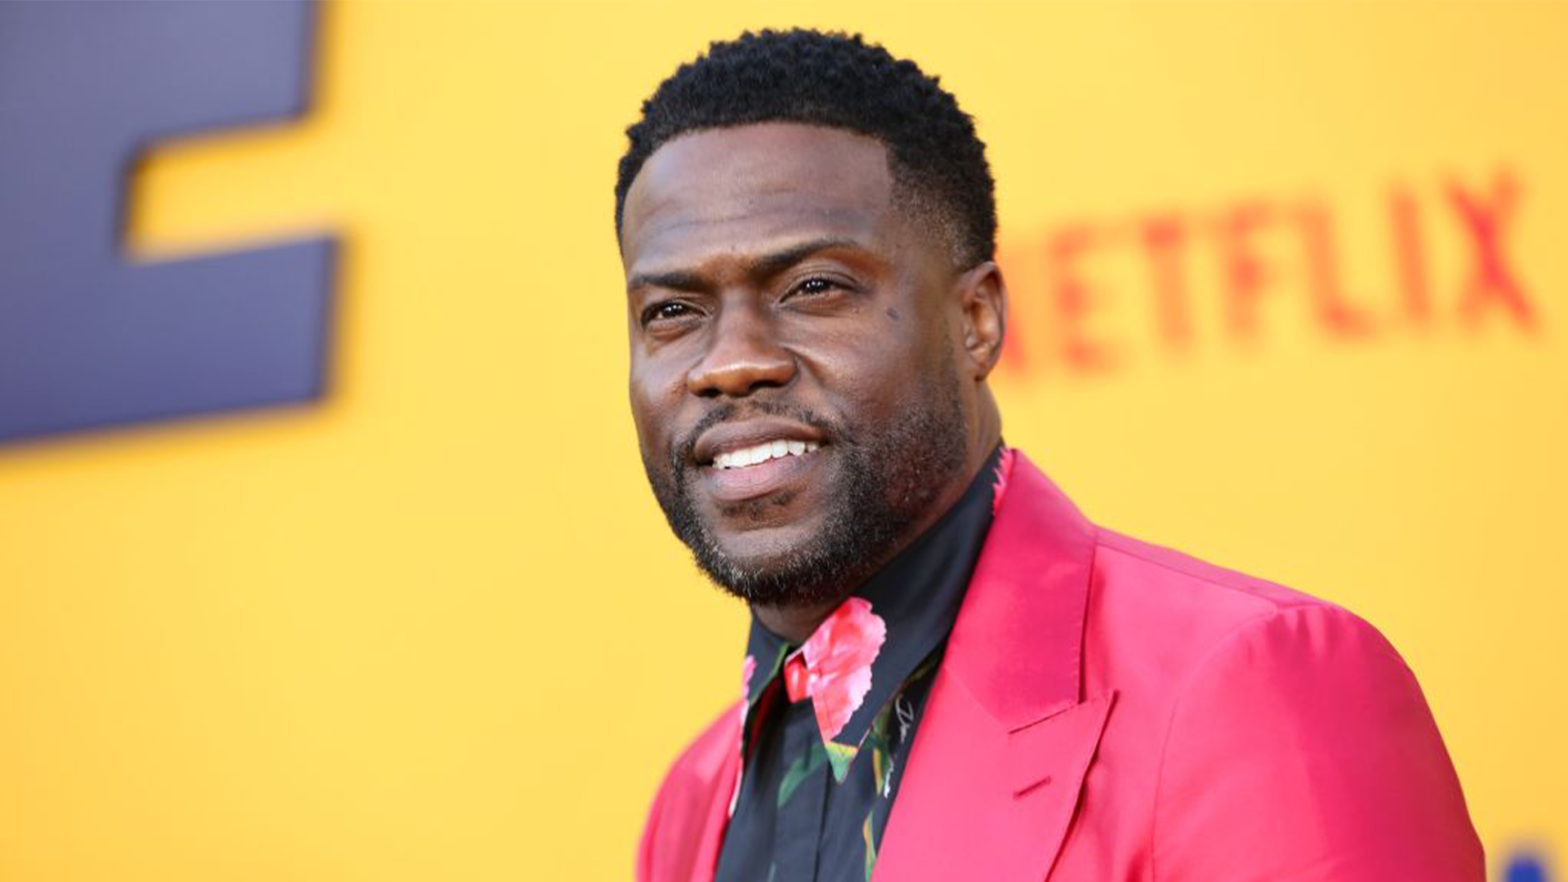 Kevin Hart Shares He Made Nearly $30M For The 'Jumanji' Sequel: 'I Took Less Money Hoping That The Movie Would Find Amazing Success'